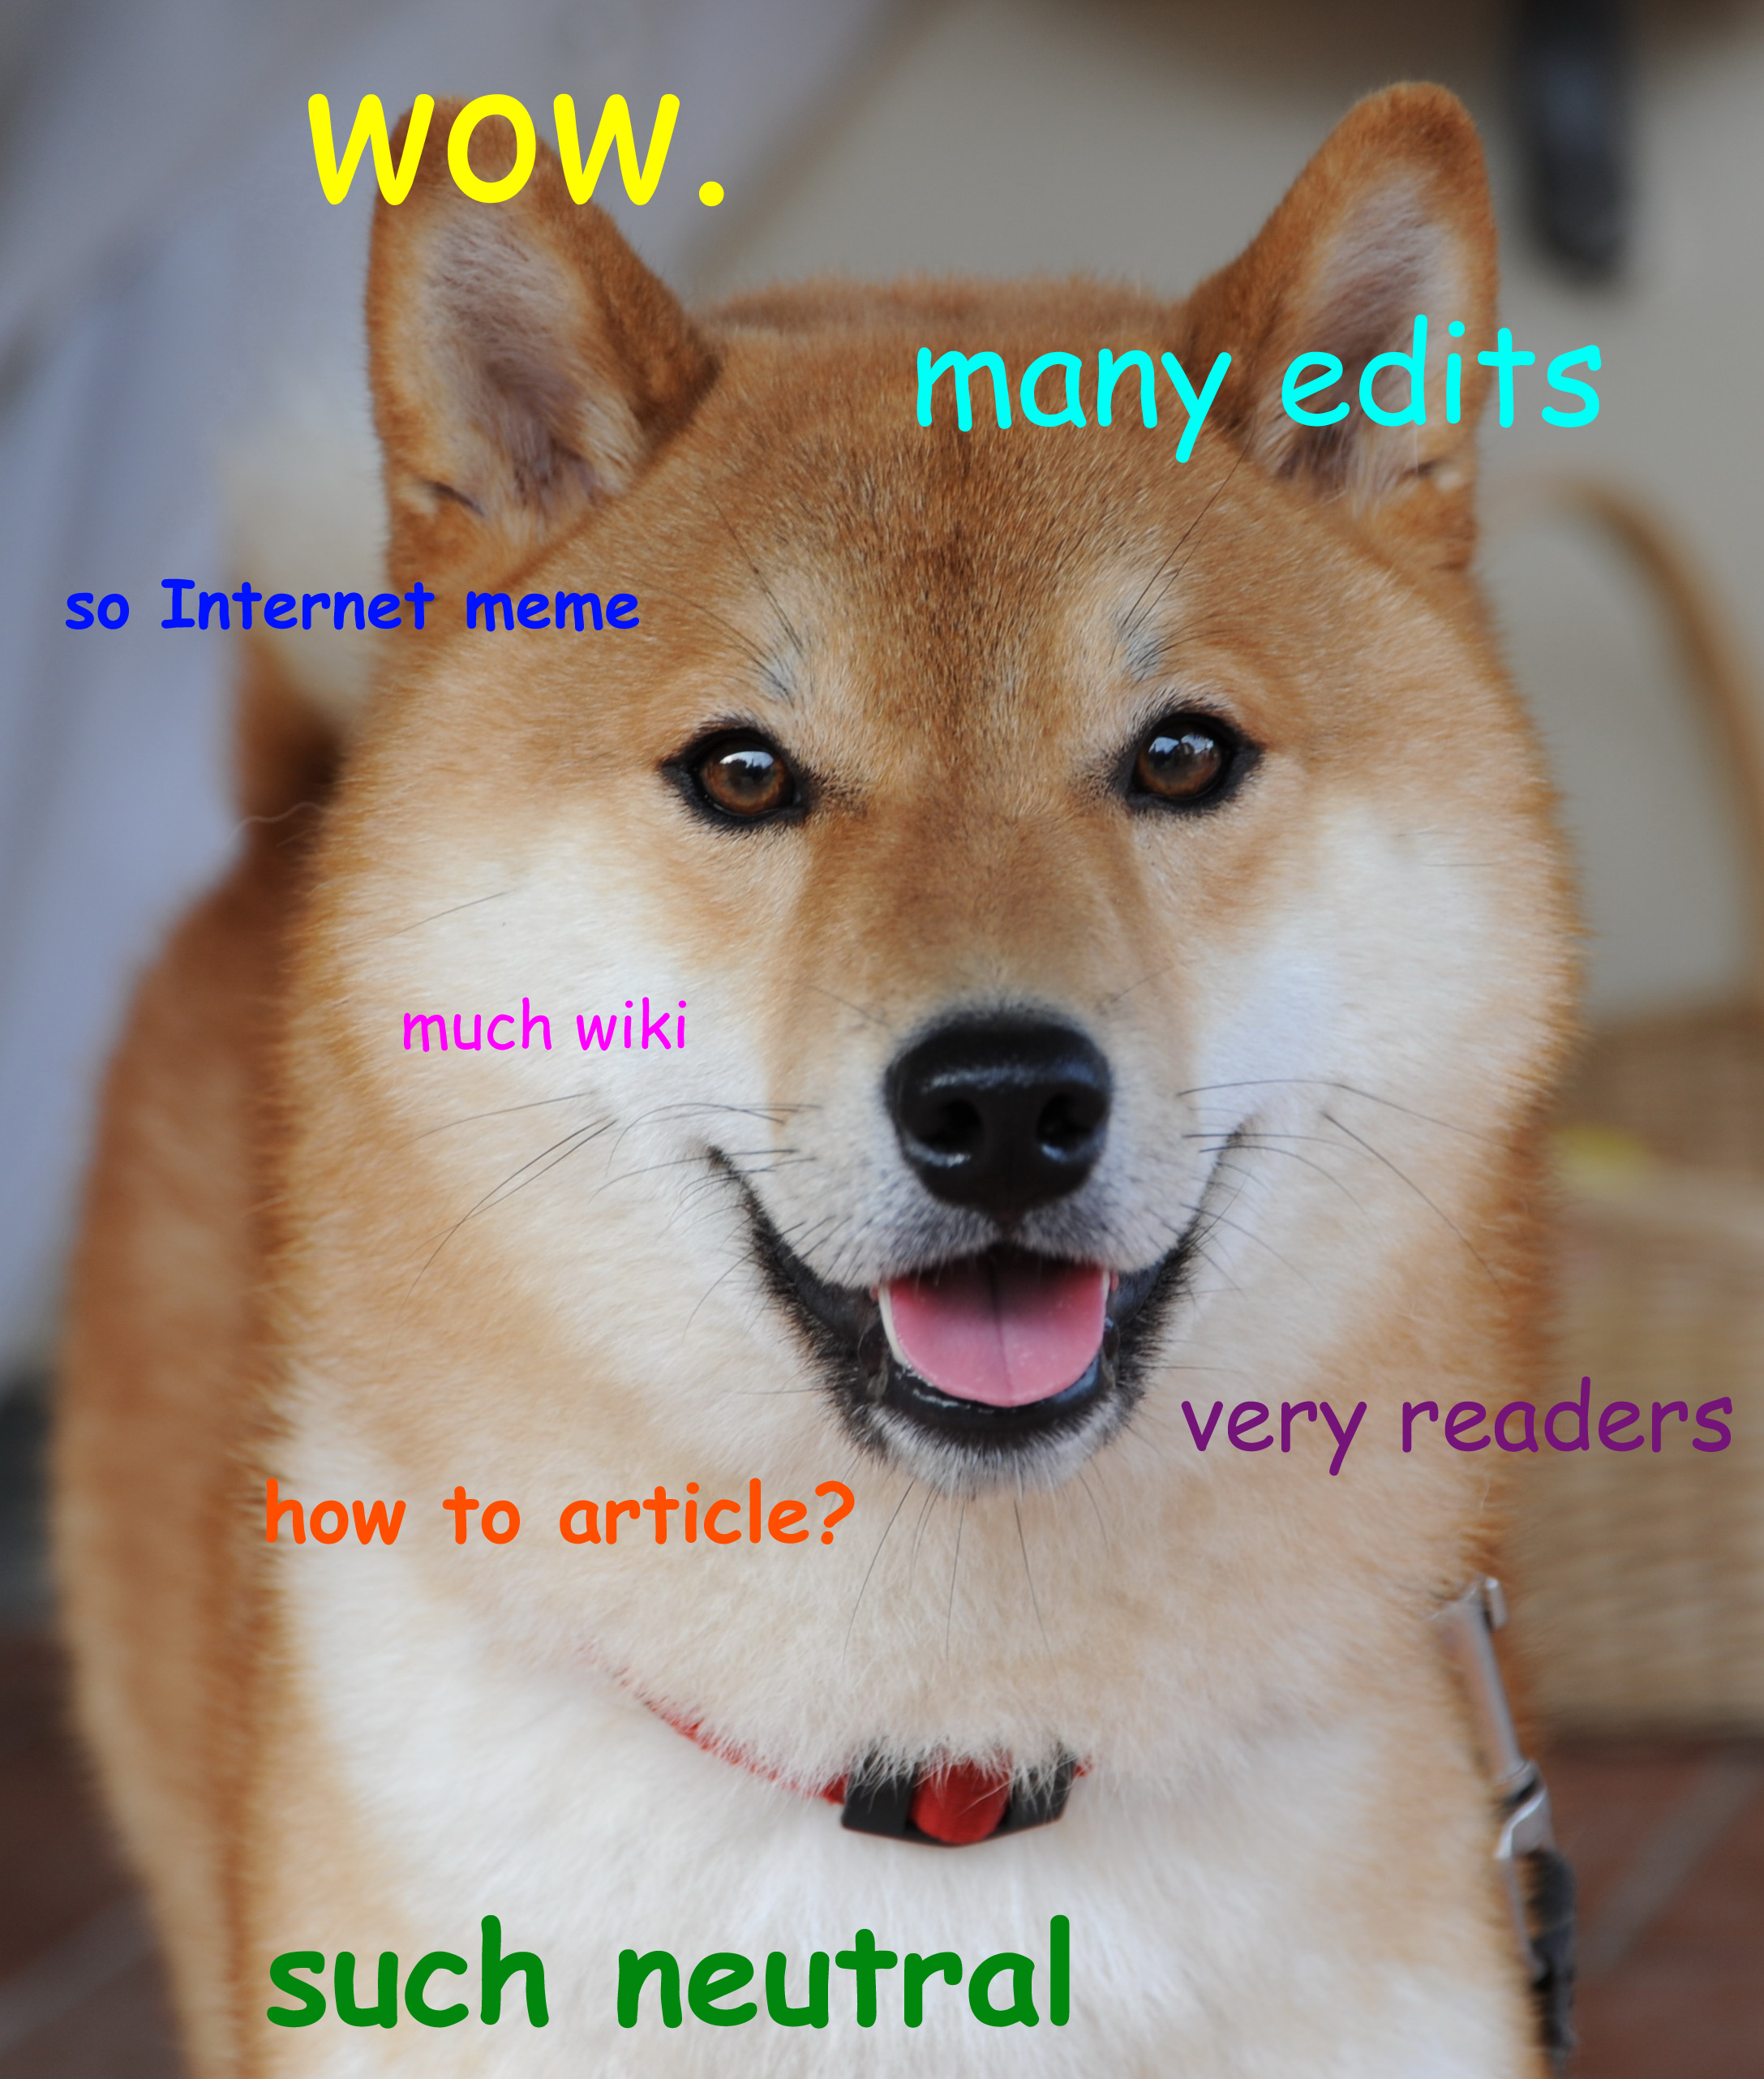 Guest Post by BTC Peers: The Curious Case of the Doge Meme and Dogecoin | CoinMarketCap